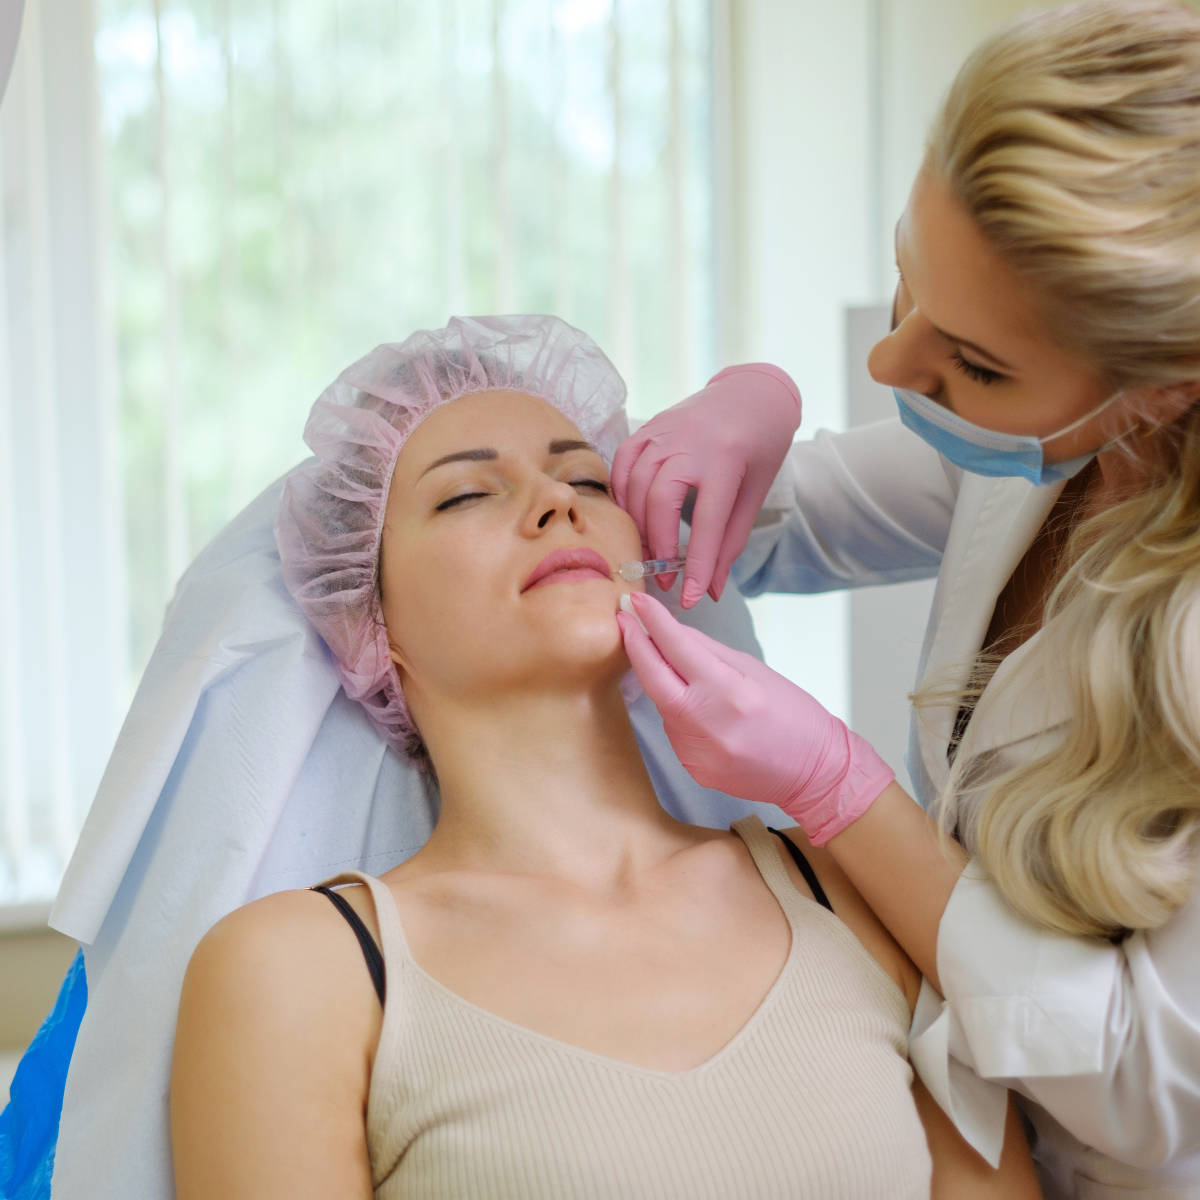 Woman getting treatment with injectable hyaluronic acid dermal filler